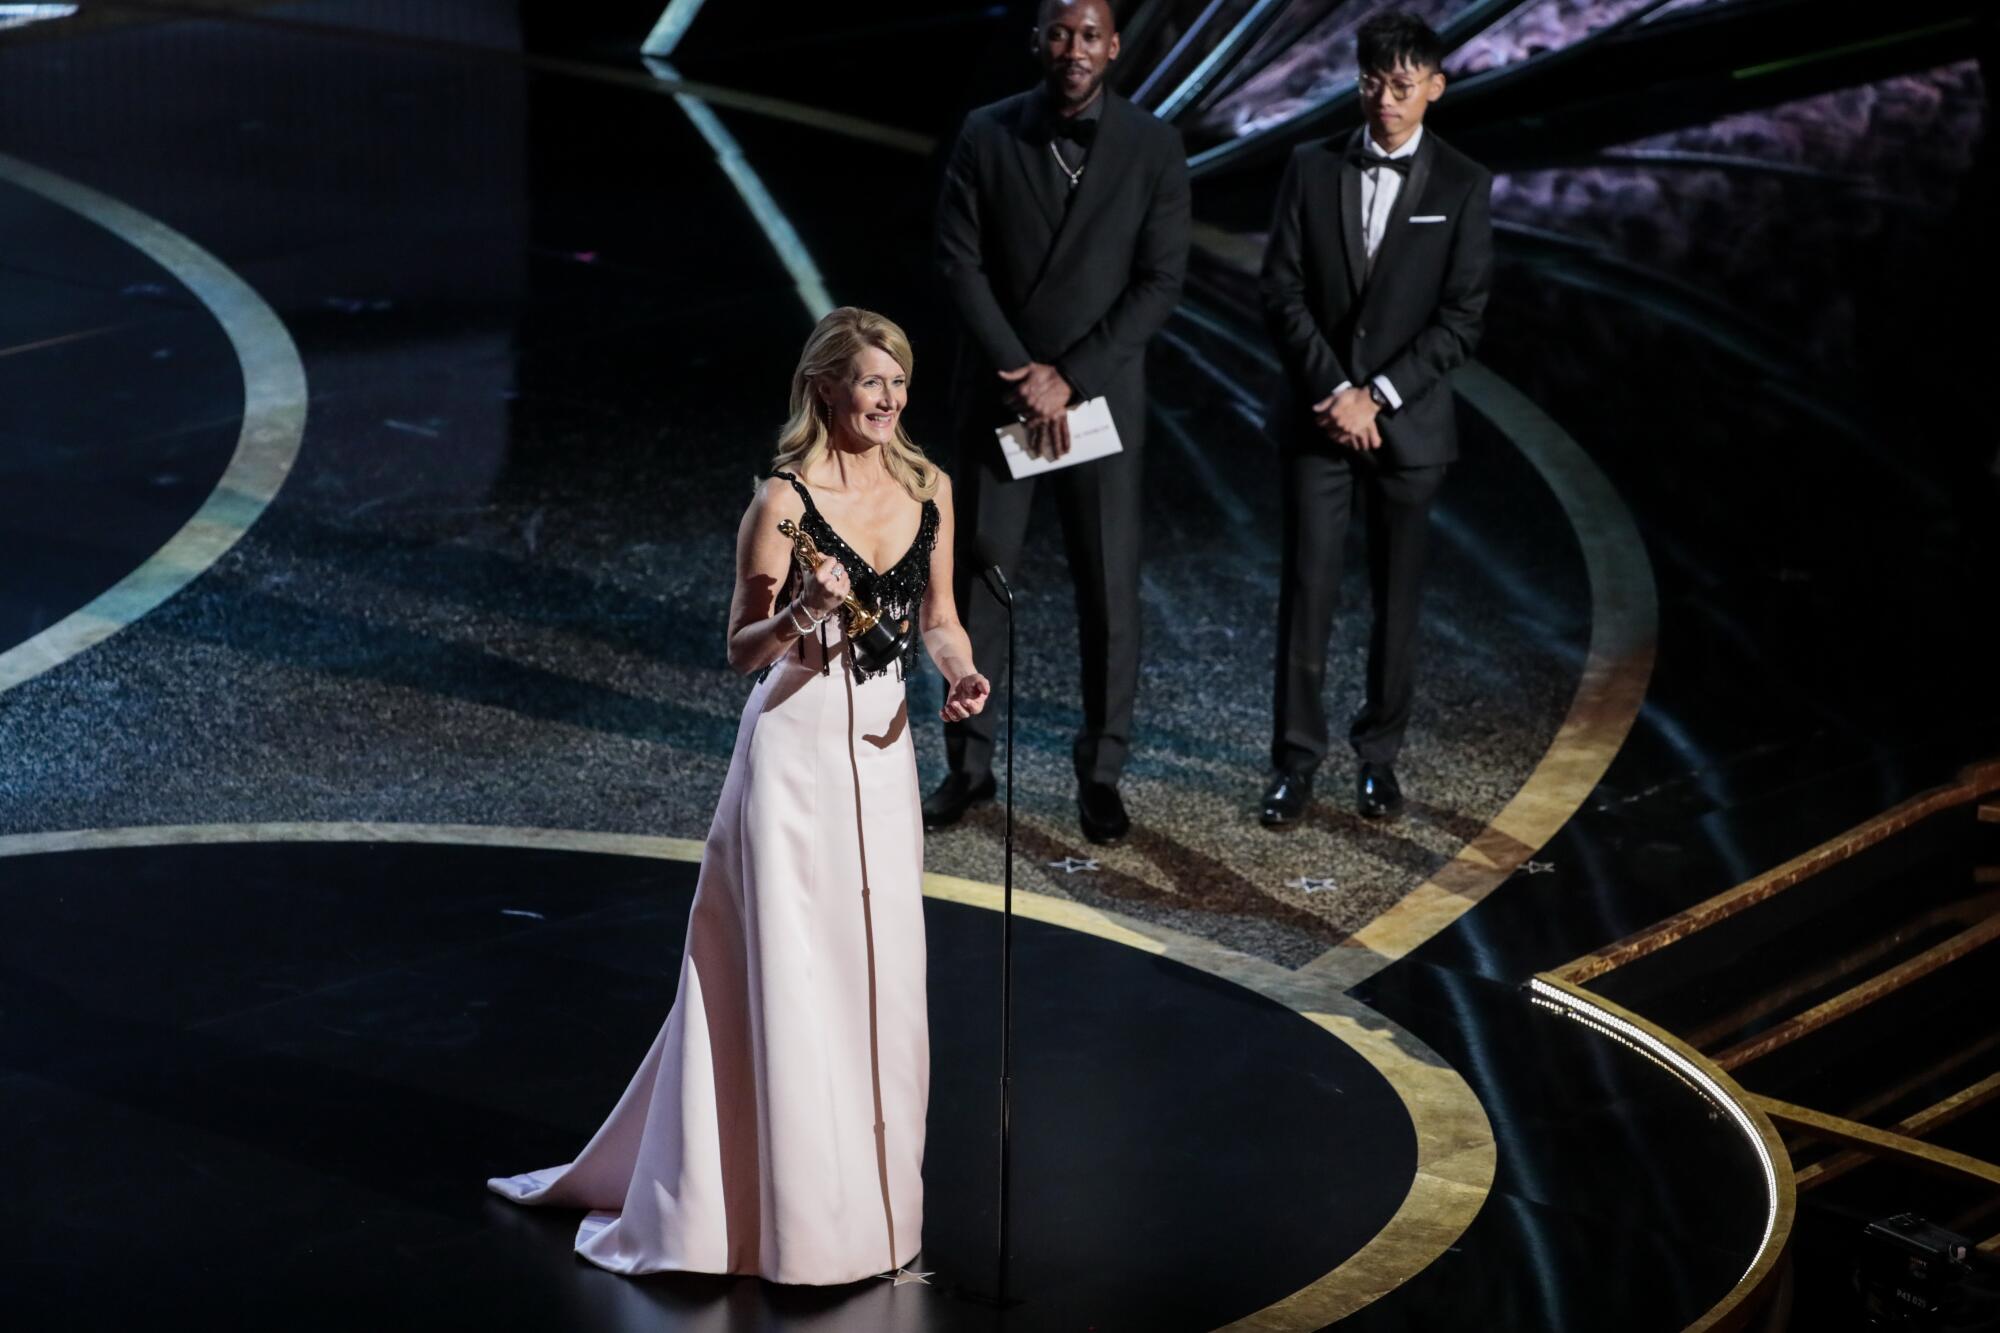 Oscars 2020: Highlights from the red carpet and broadcast - Los